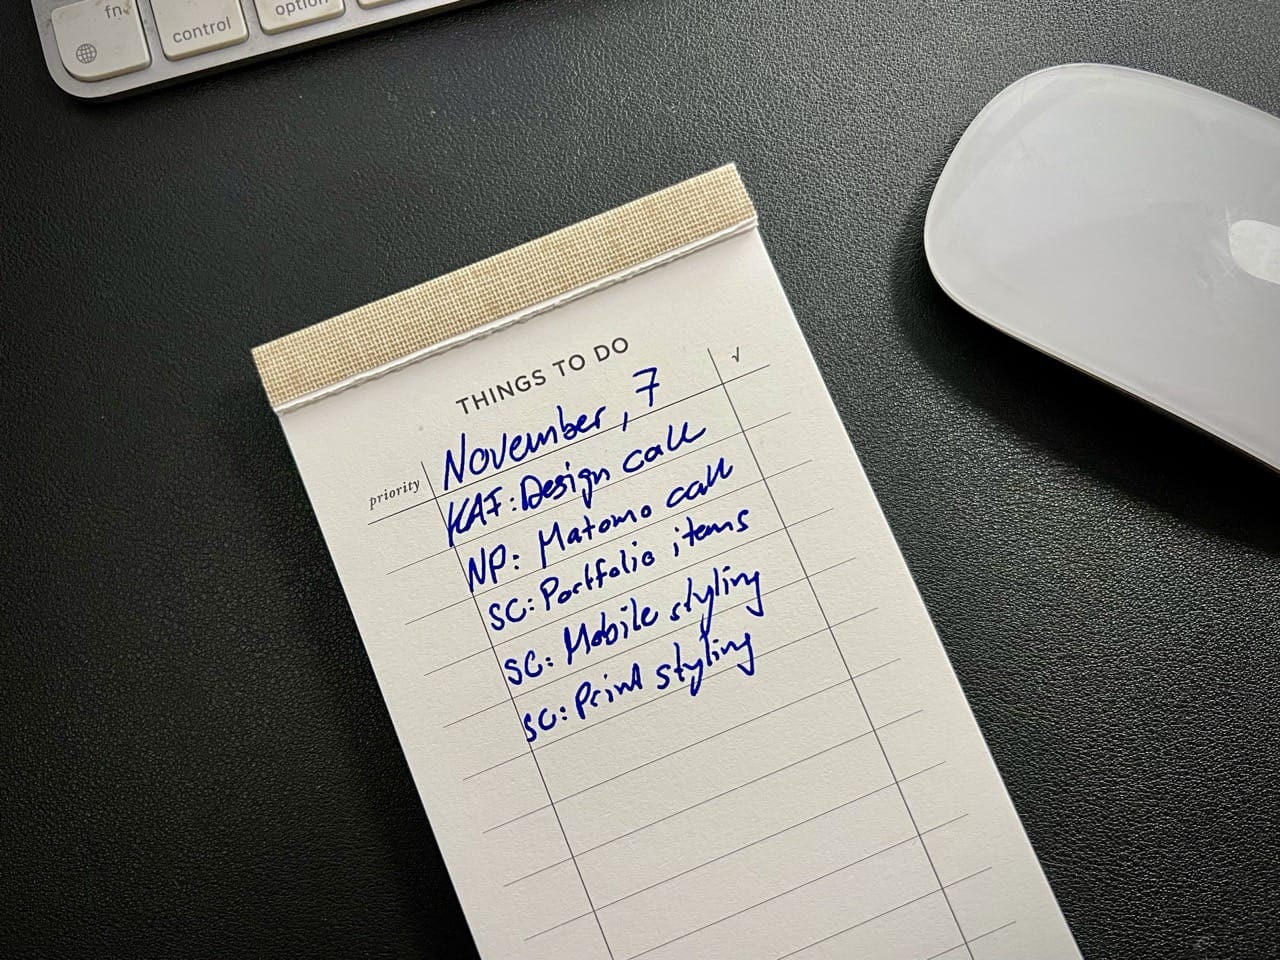 Example of my daily to do list